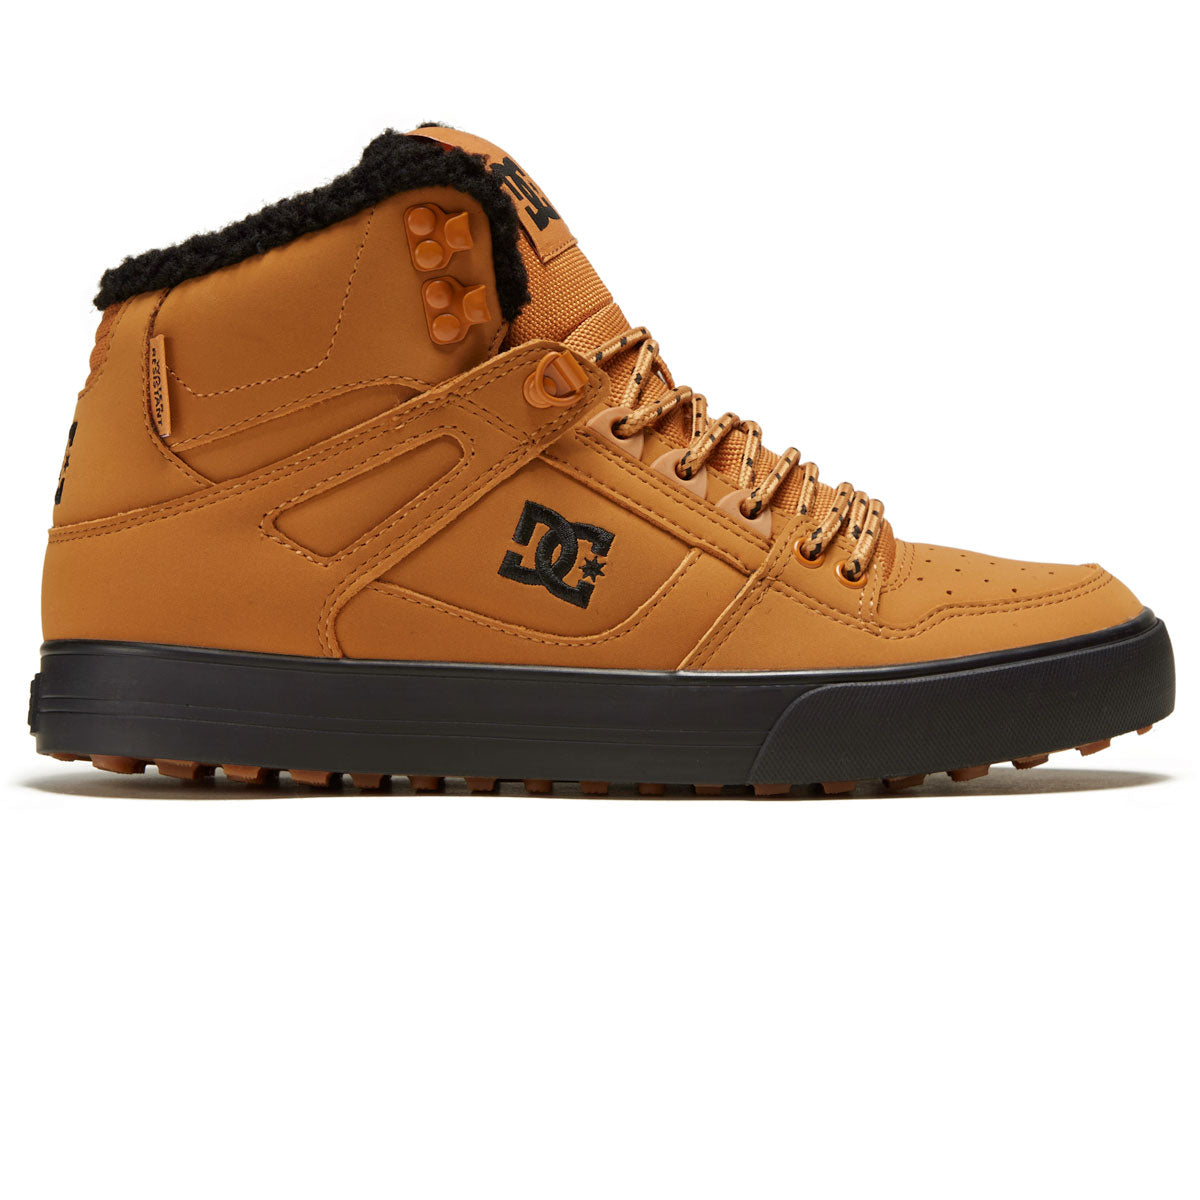 DC Pure High-top Wc Winter Shoes - Wheat/Black image 1